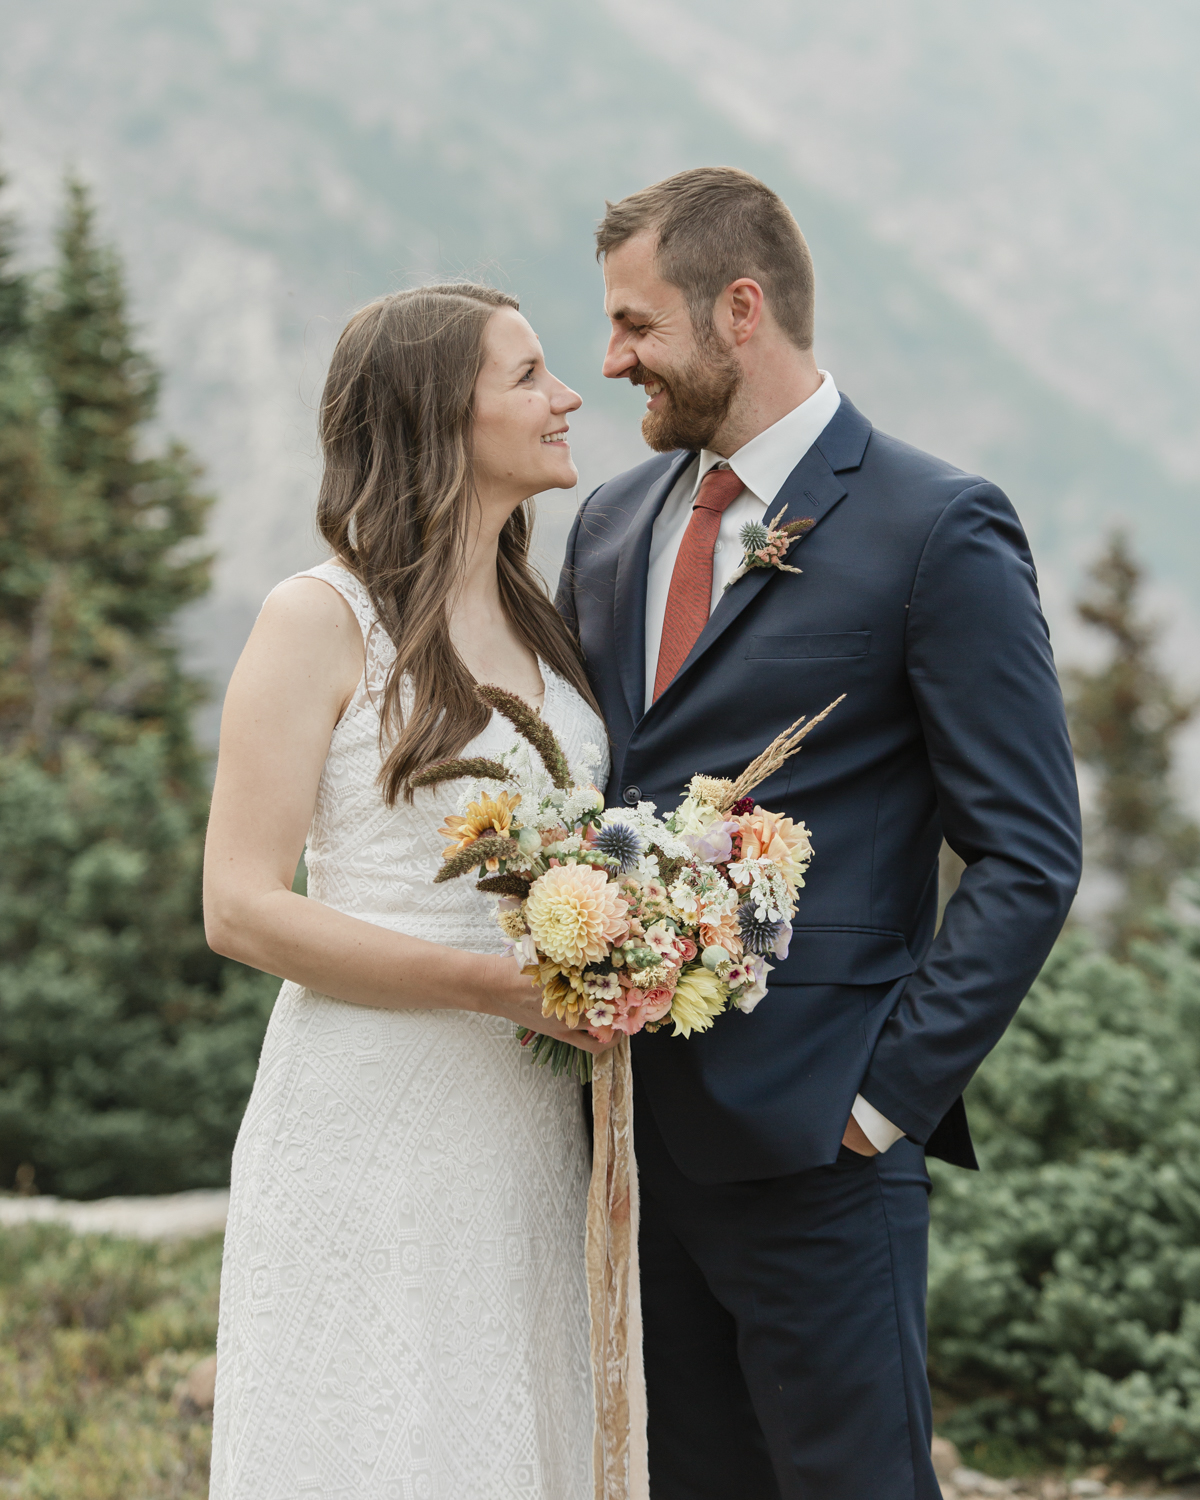 Banff Helicopter Elopement. A private and romantic wedding. 